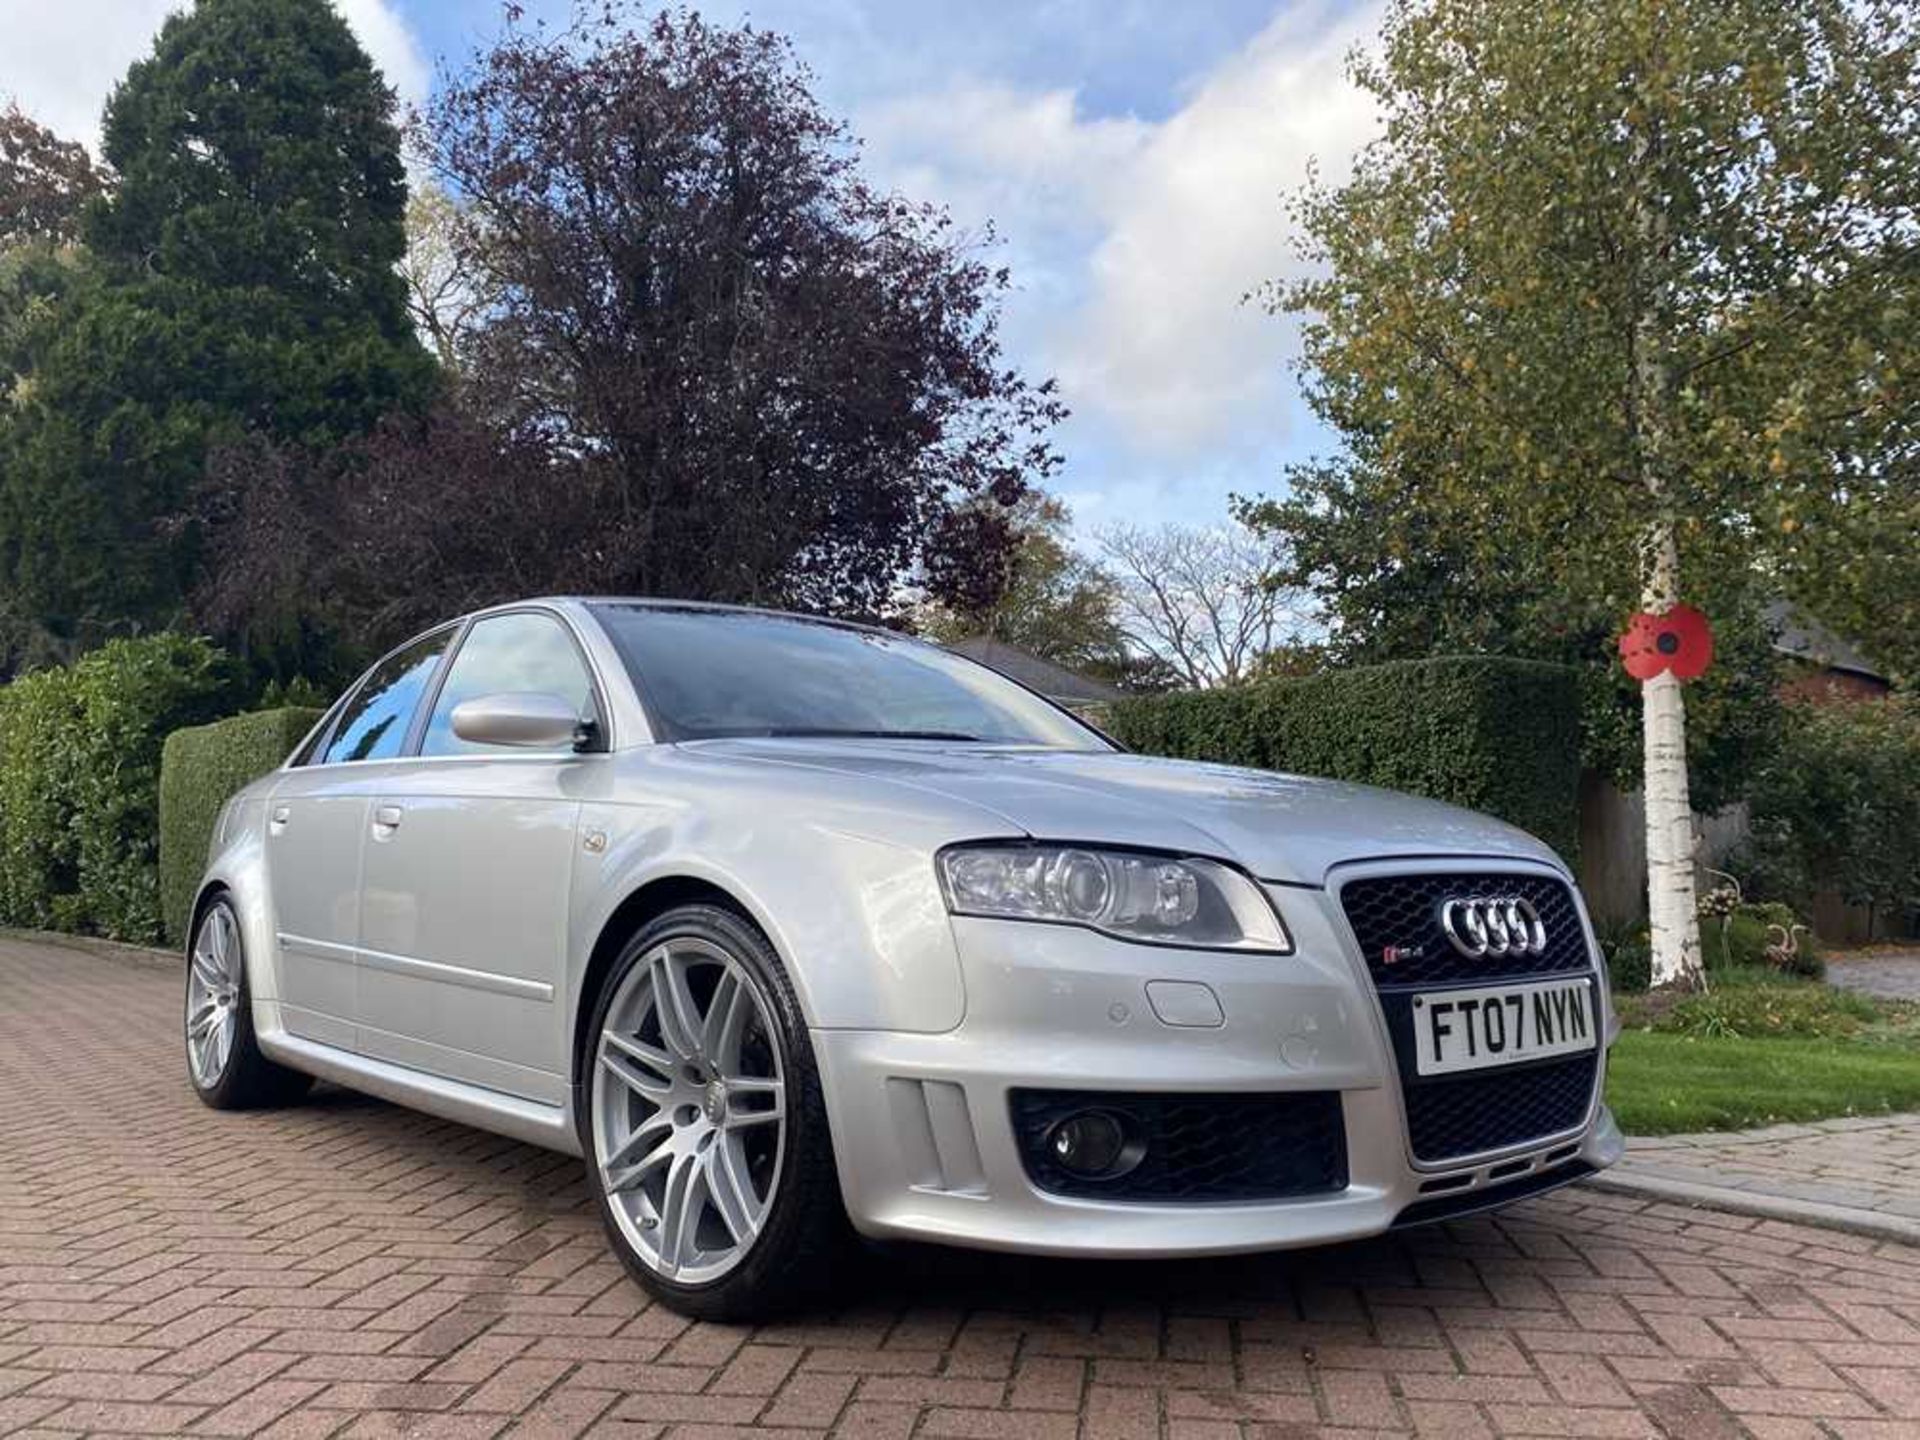 2007 Audi RS4 Saloon One owner and just c.60,000 miles from new - Image 3 of 86